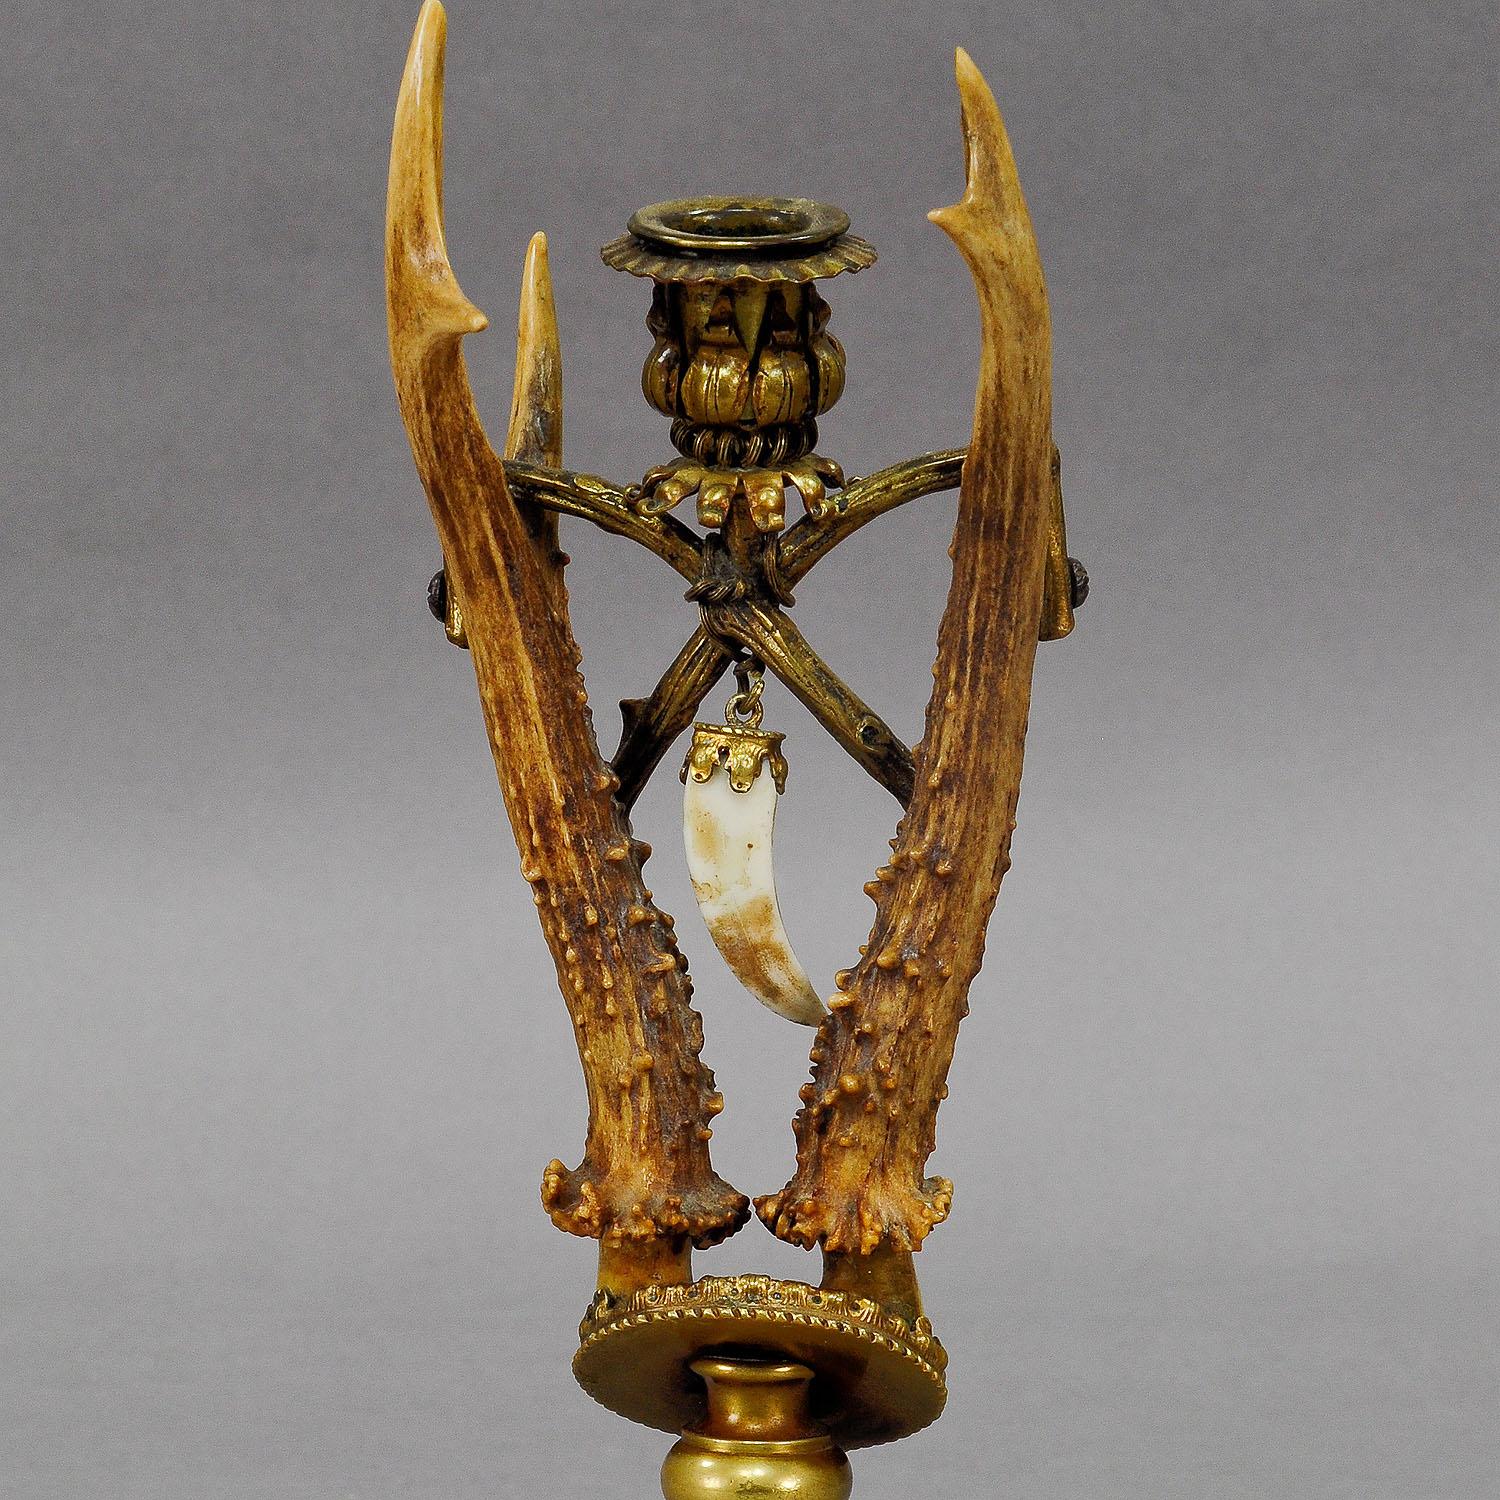 Rustic Lodge Style Antler Candleholder with Handforged Brass Base, circa 1880 For Sale